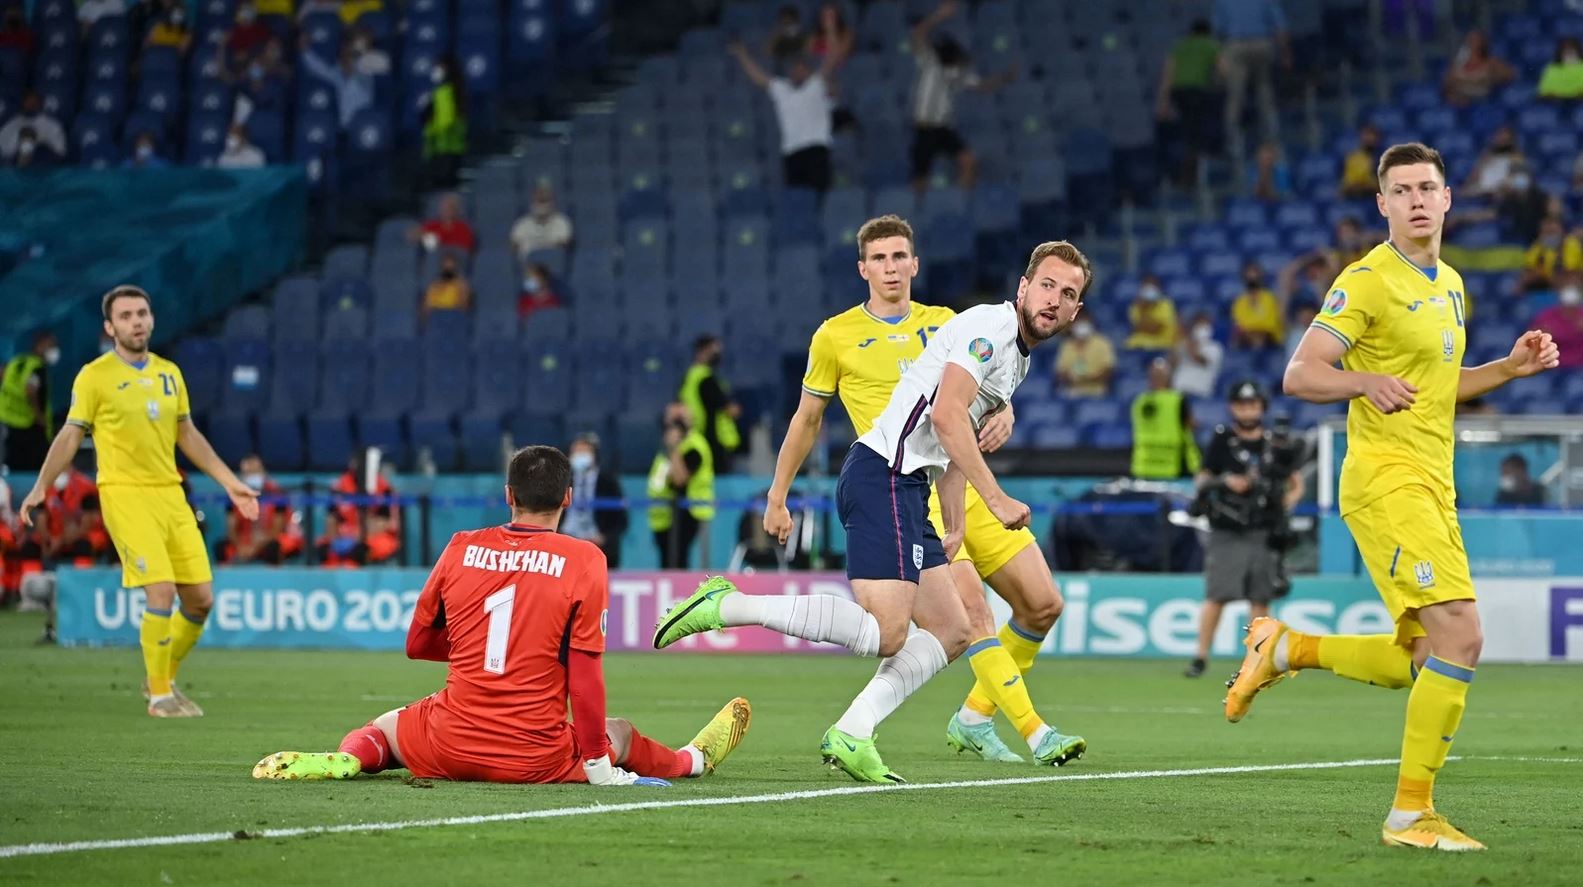 Against Ukraine, England met little opposition and for the first time in this tournament, Gareth Southgate's men were allowed to run riot and score goals